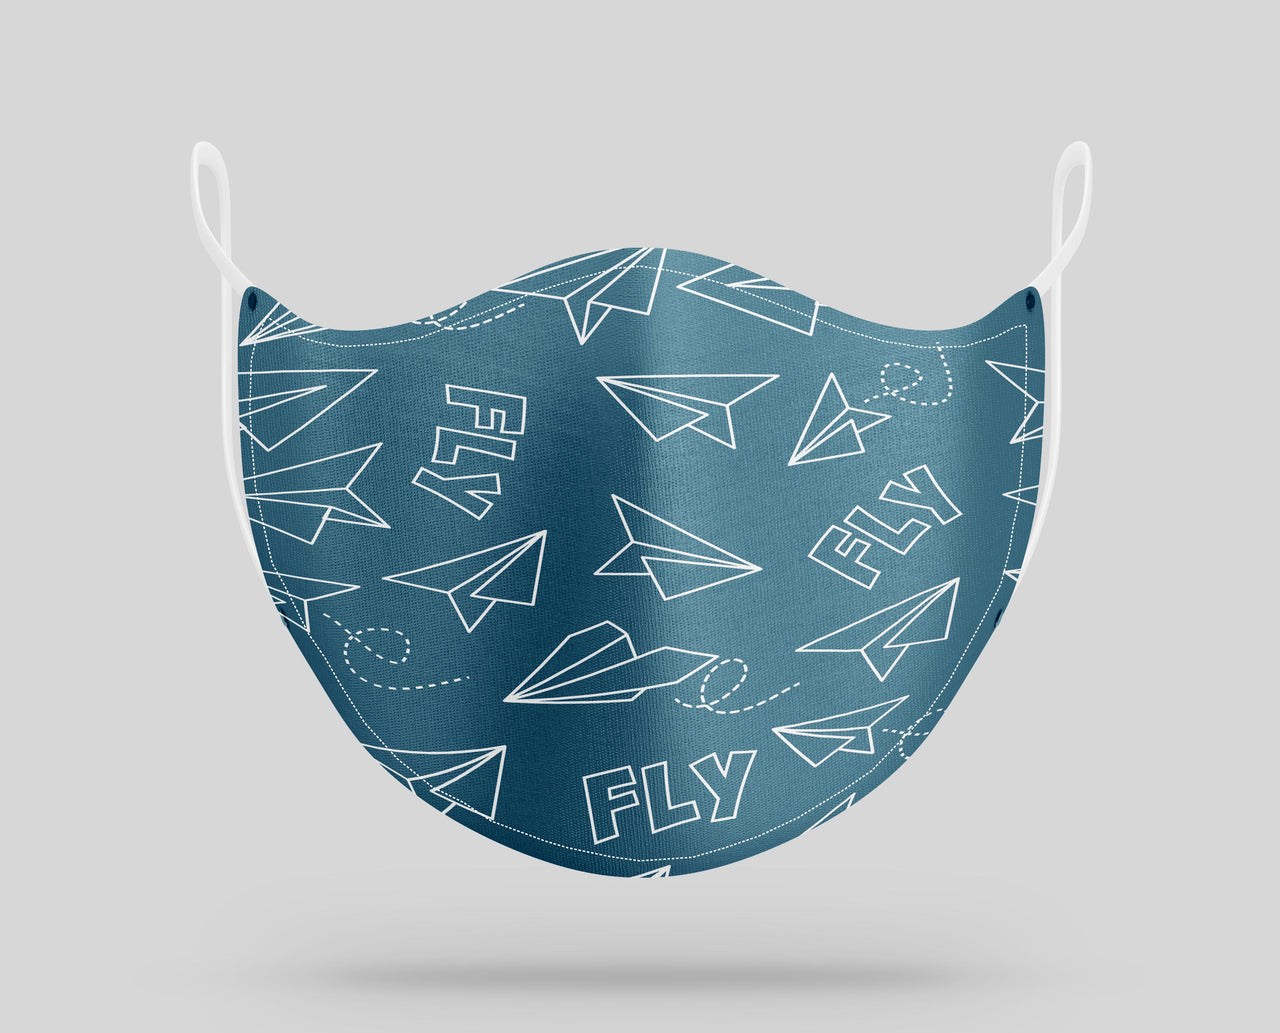 Paper Airplane & Fly Designed Face Masks